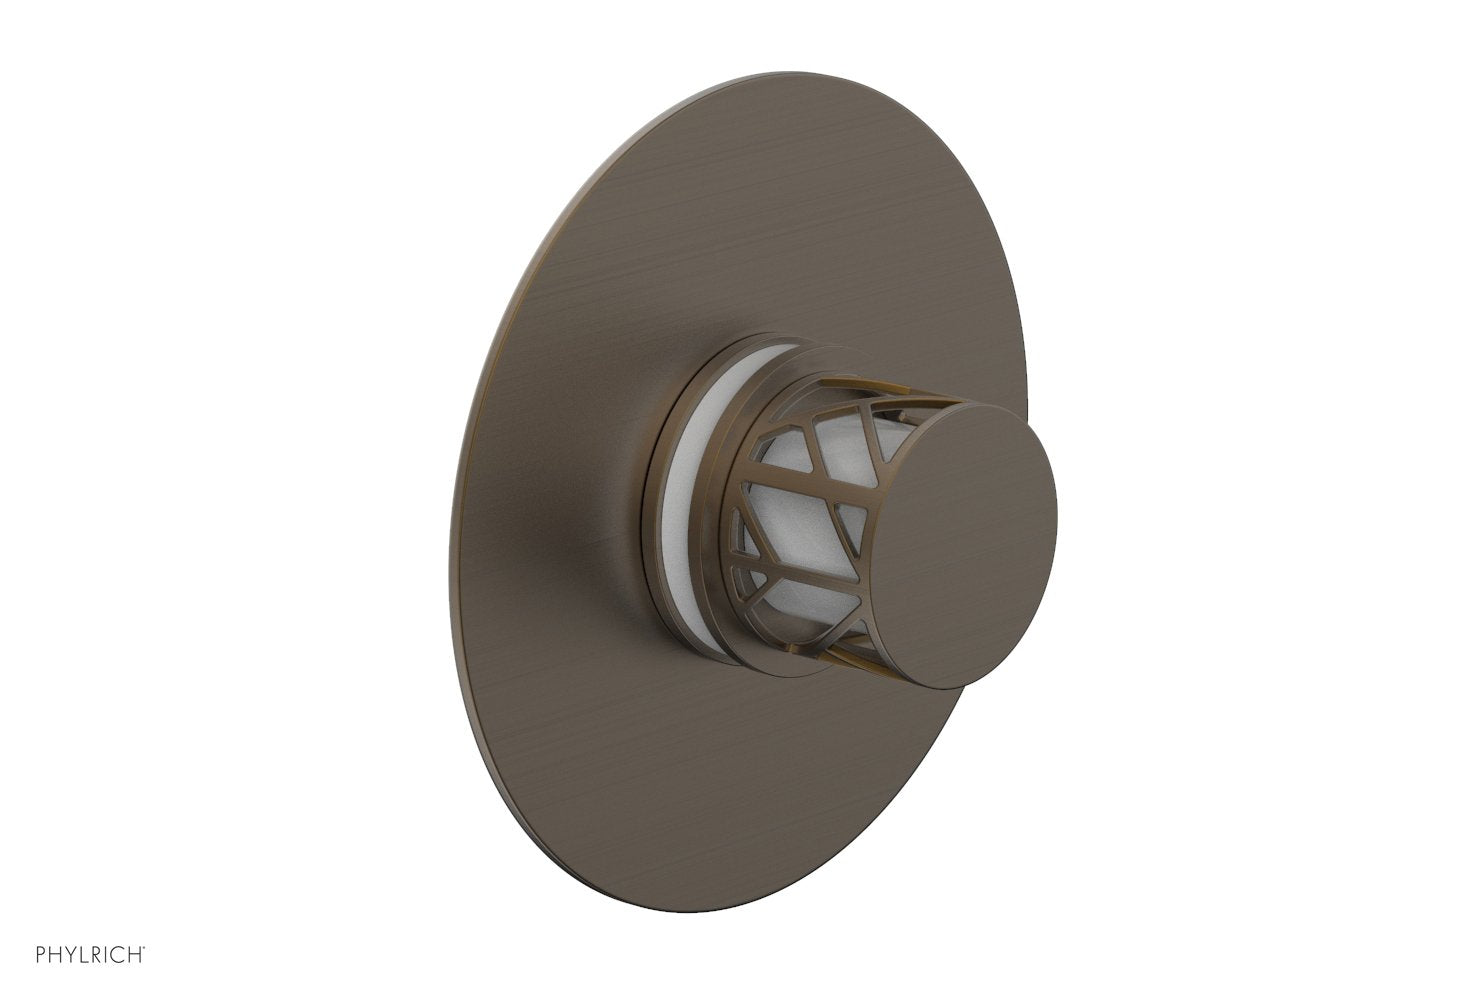 Phylrich JOLIE Pressure Balance Shower Plate & Handle Trim, Round Handle with "White" Accents